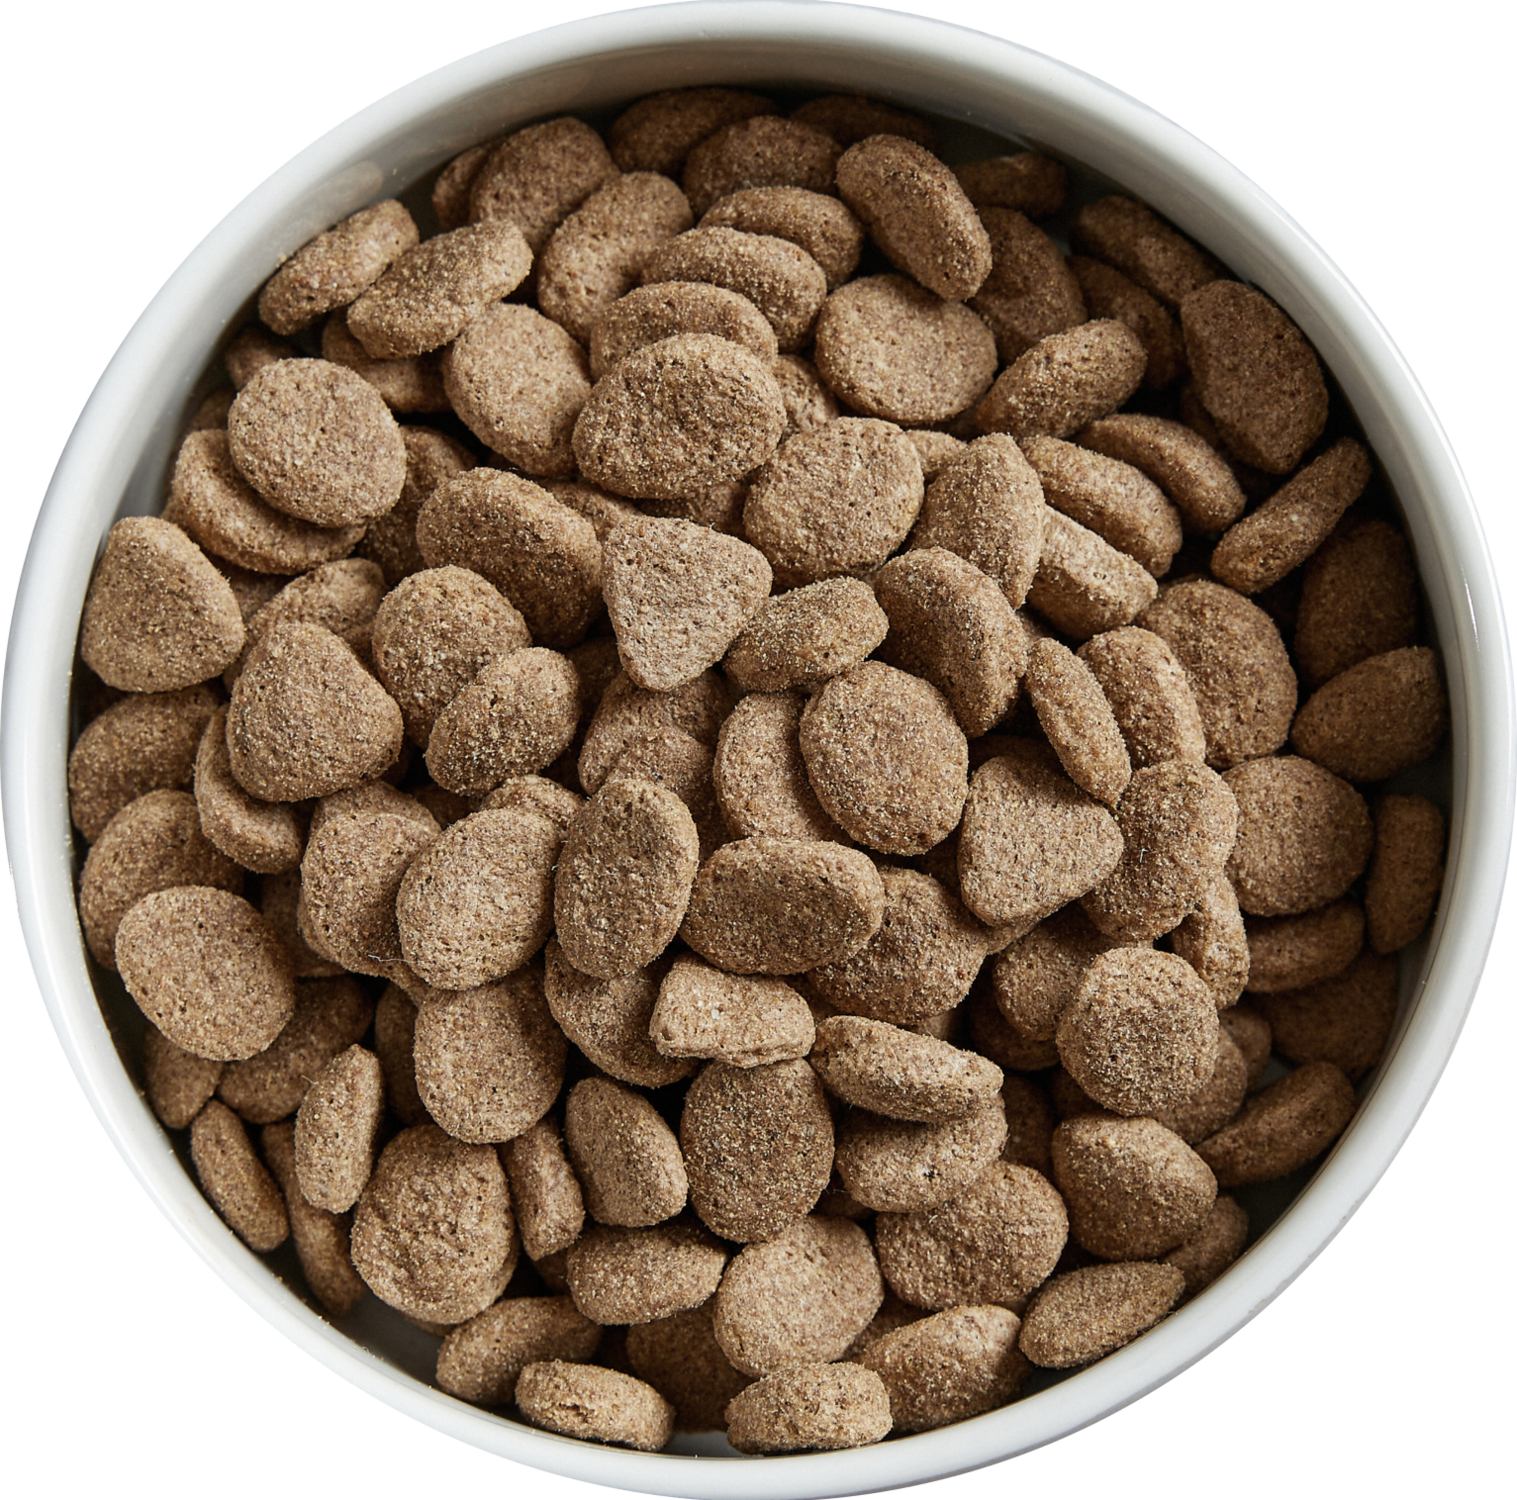 dry dog food in a bowl